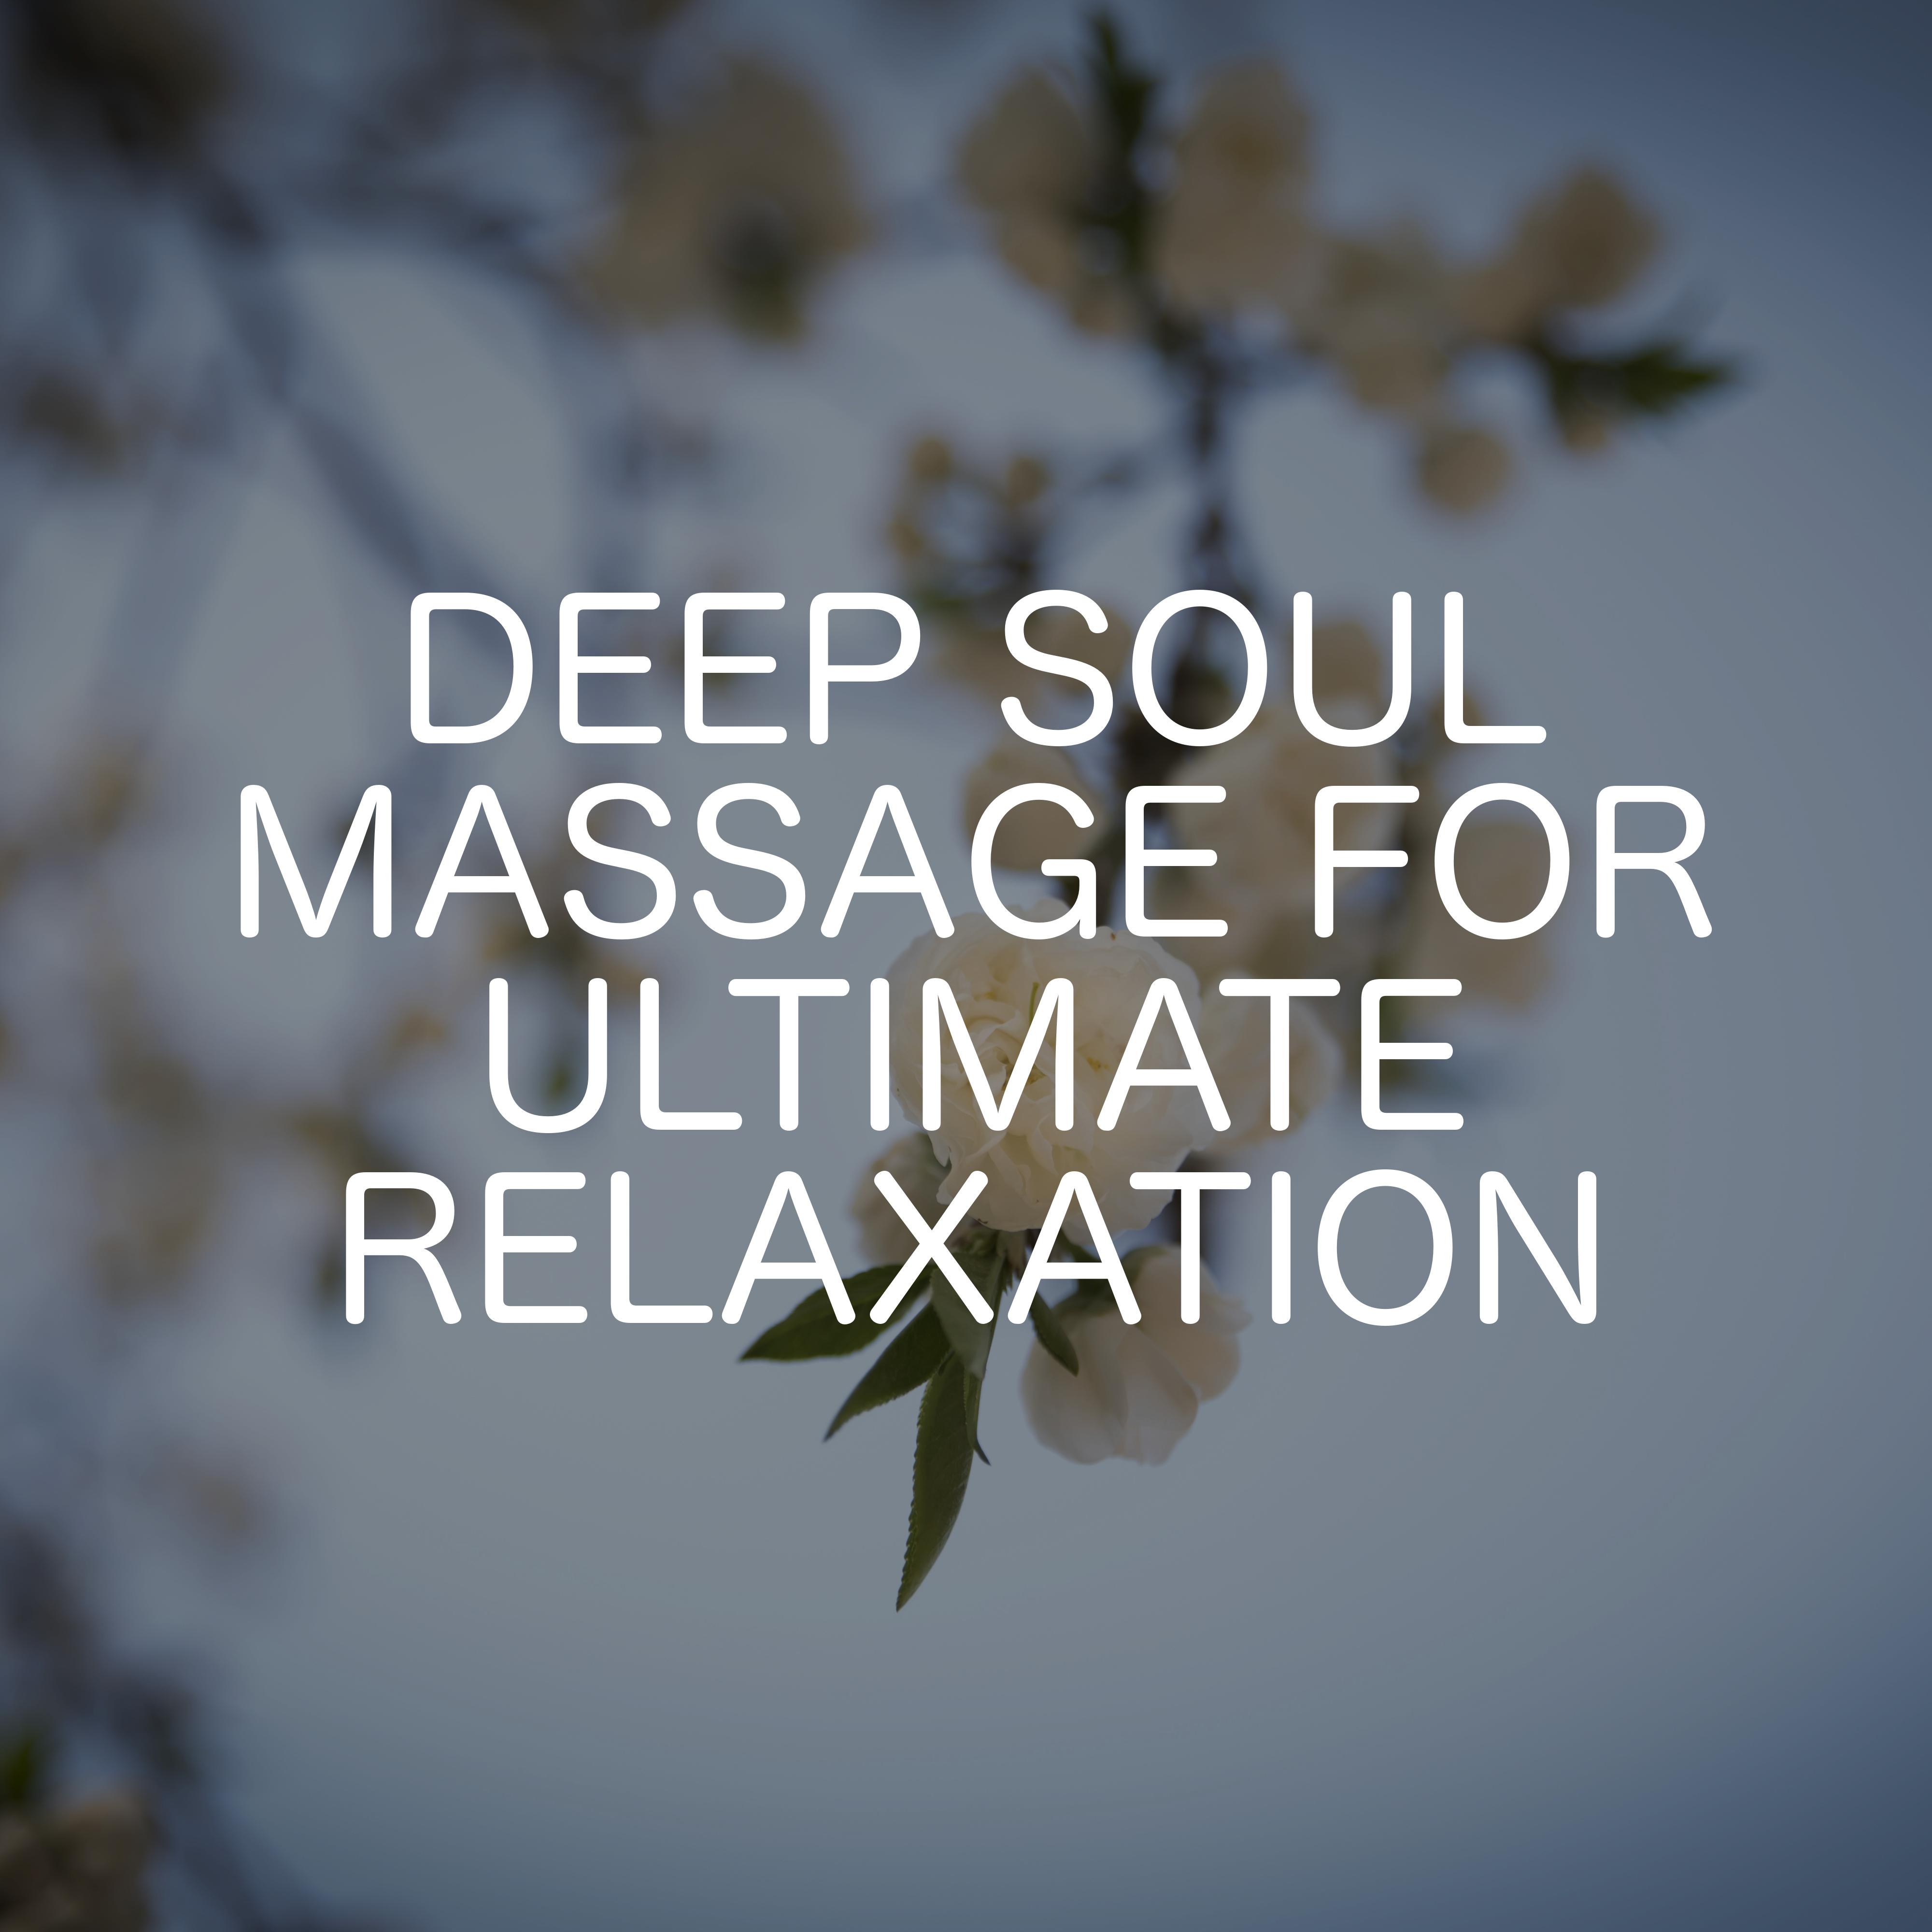 Deep Soul Massage For Ultimate Relaxation